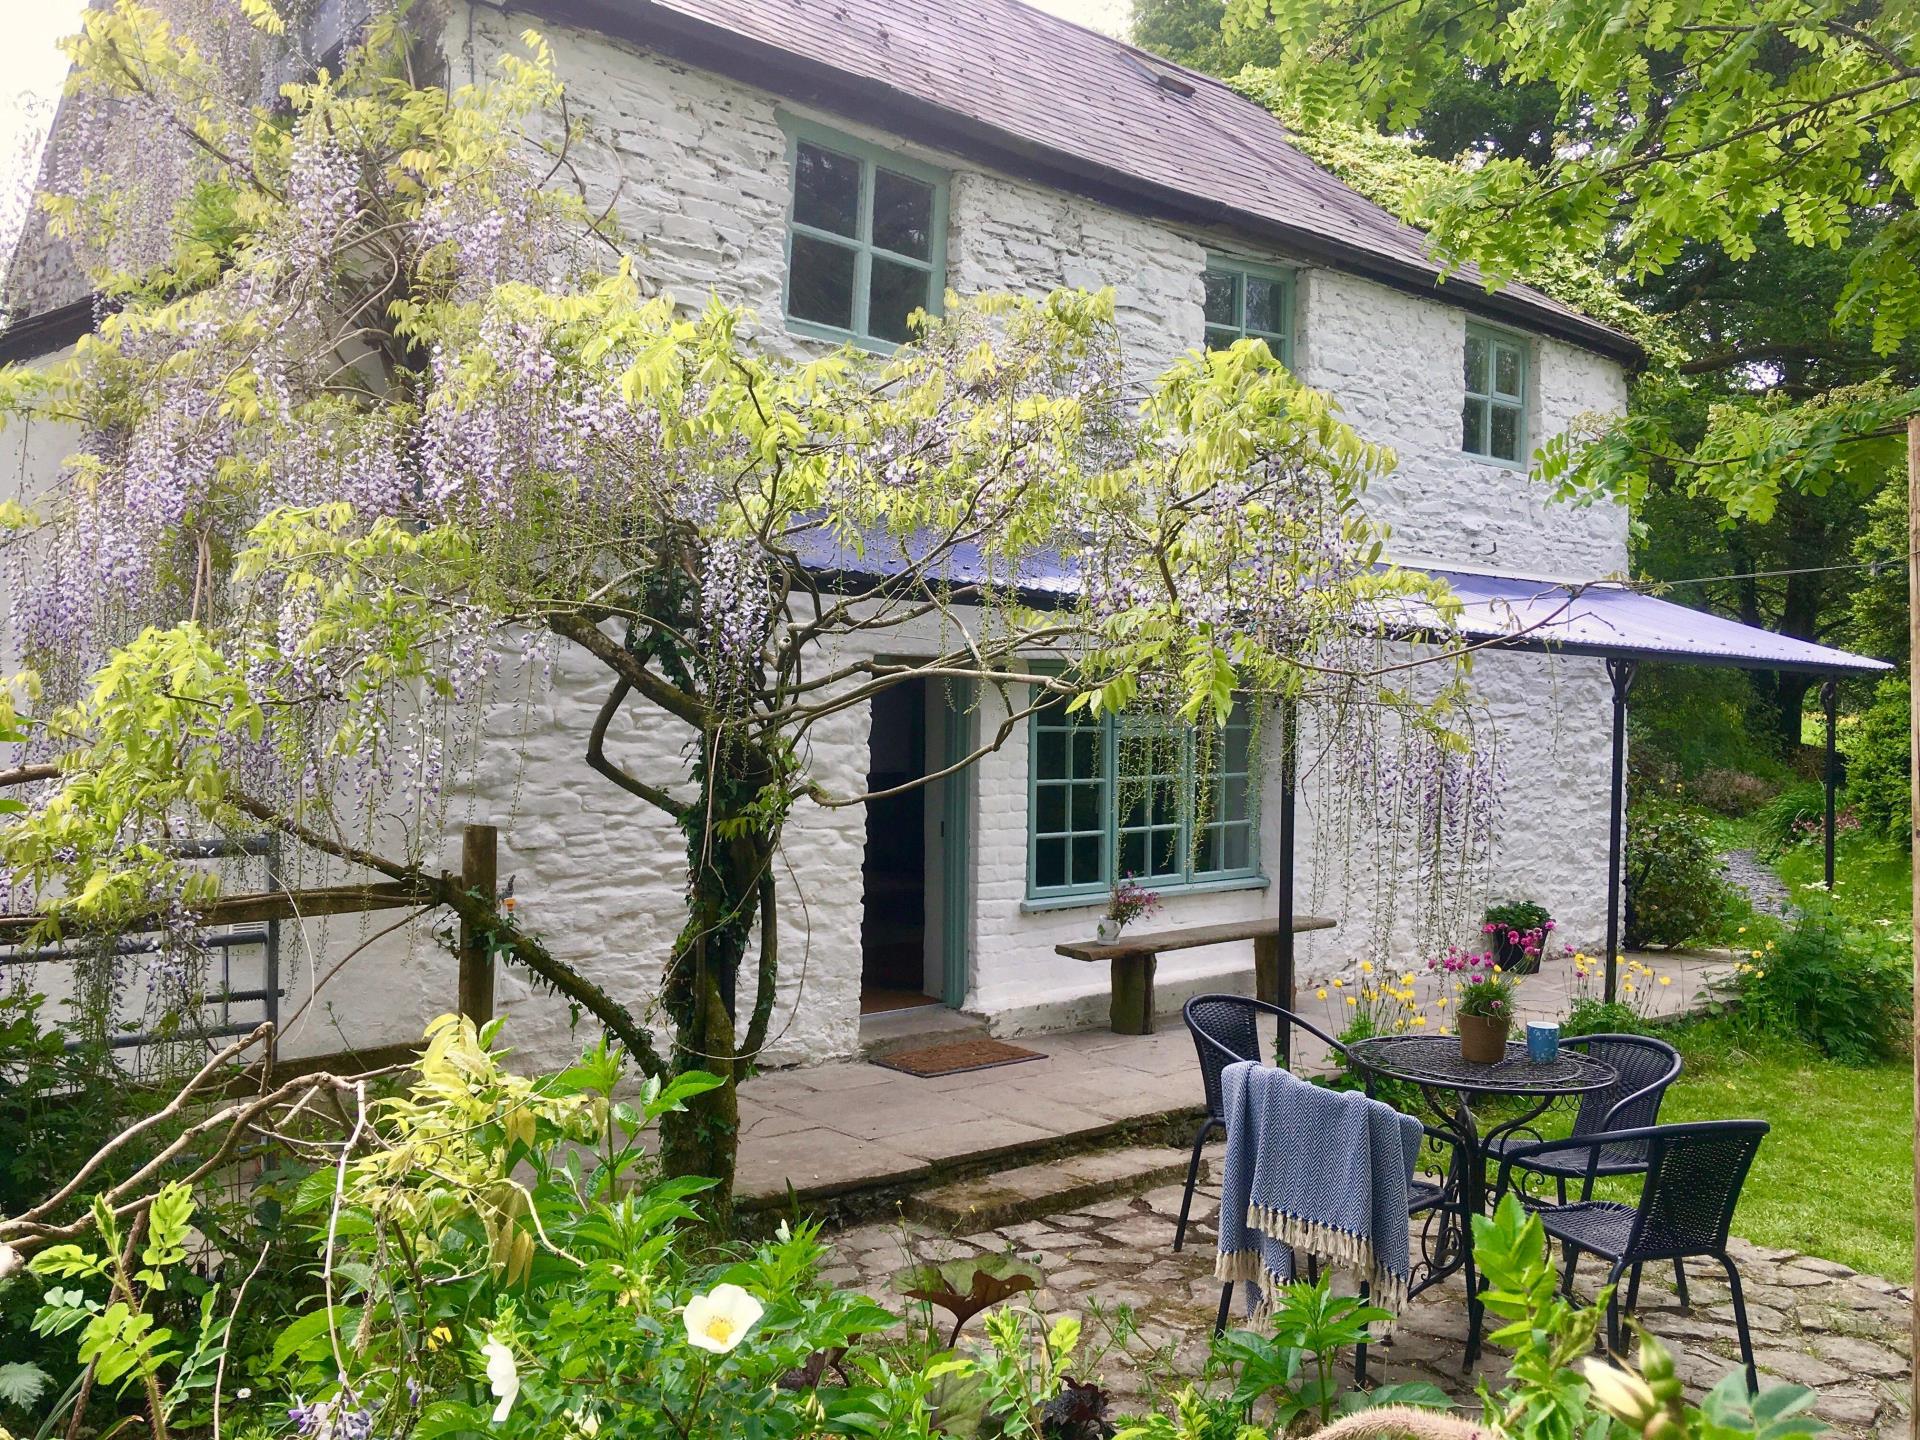 Wisteria blooming on Glanyrafon in May